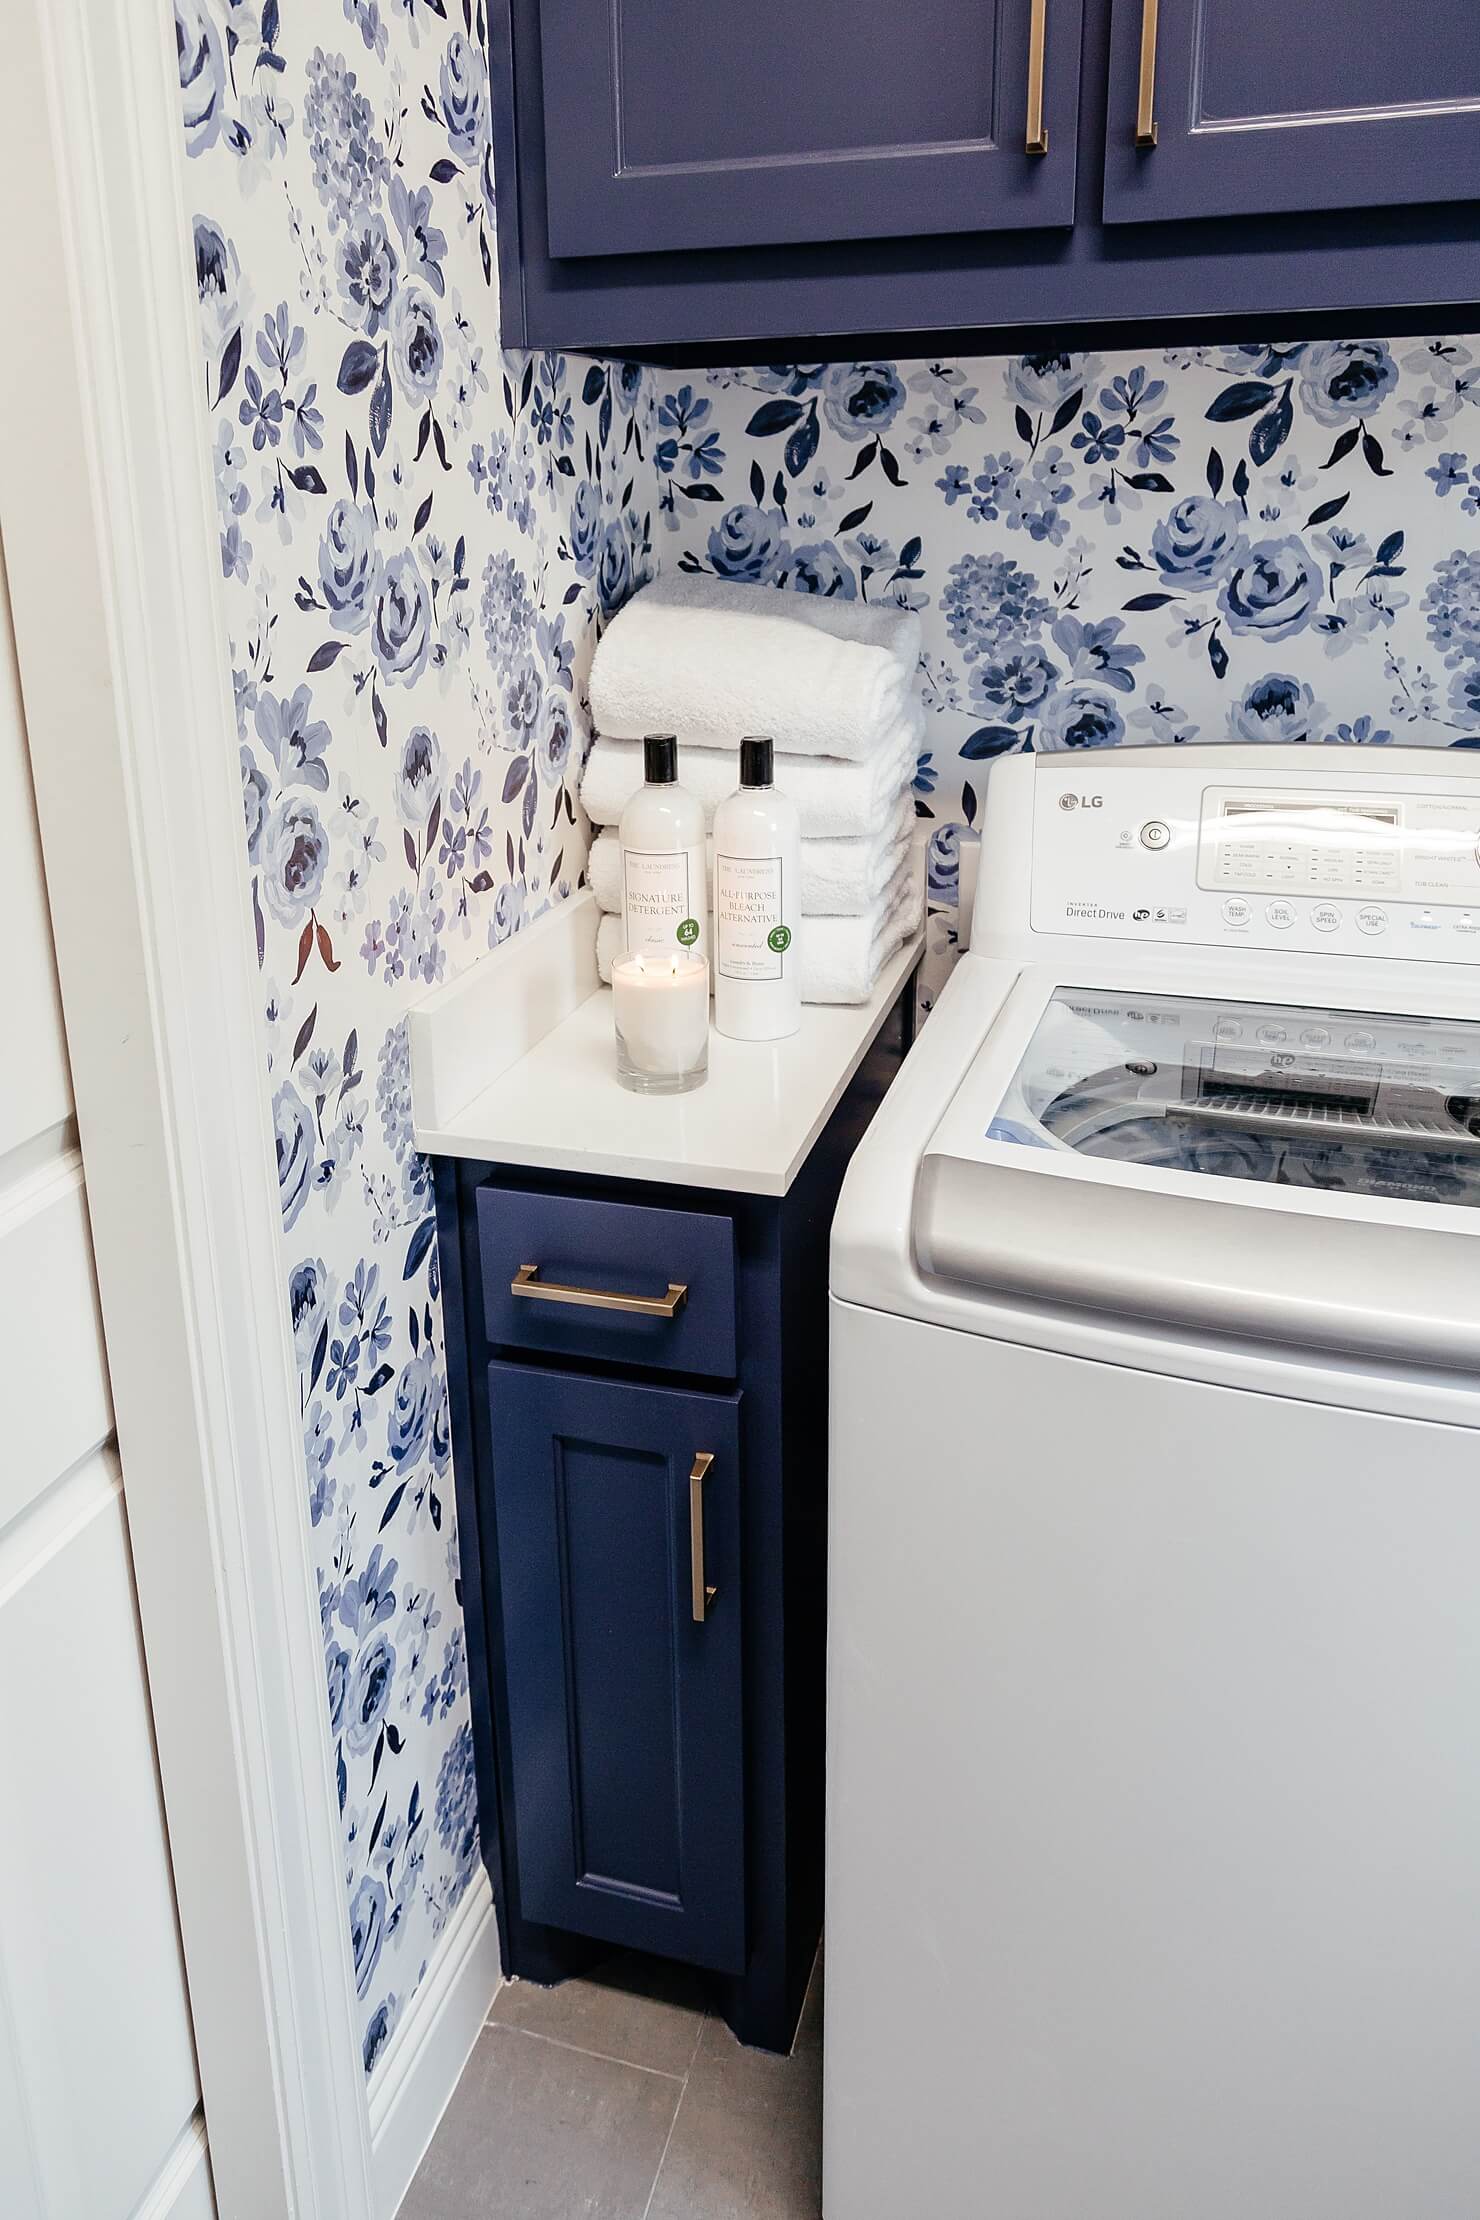 brighton keller laundry room blue and white print wall paper navy blue painted cabinets cute laundry room